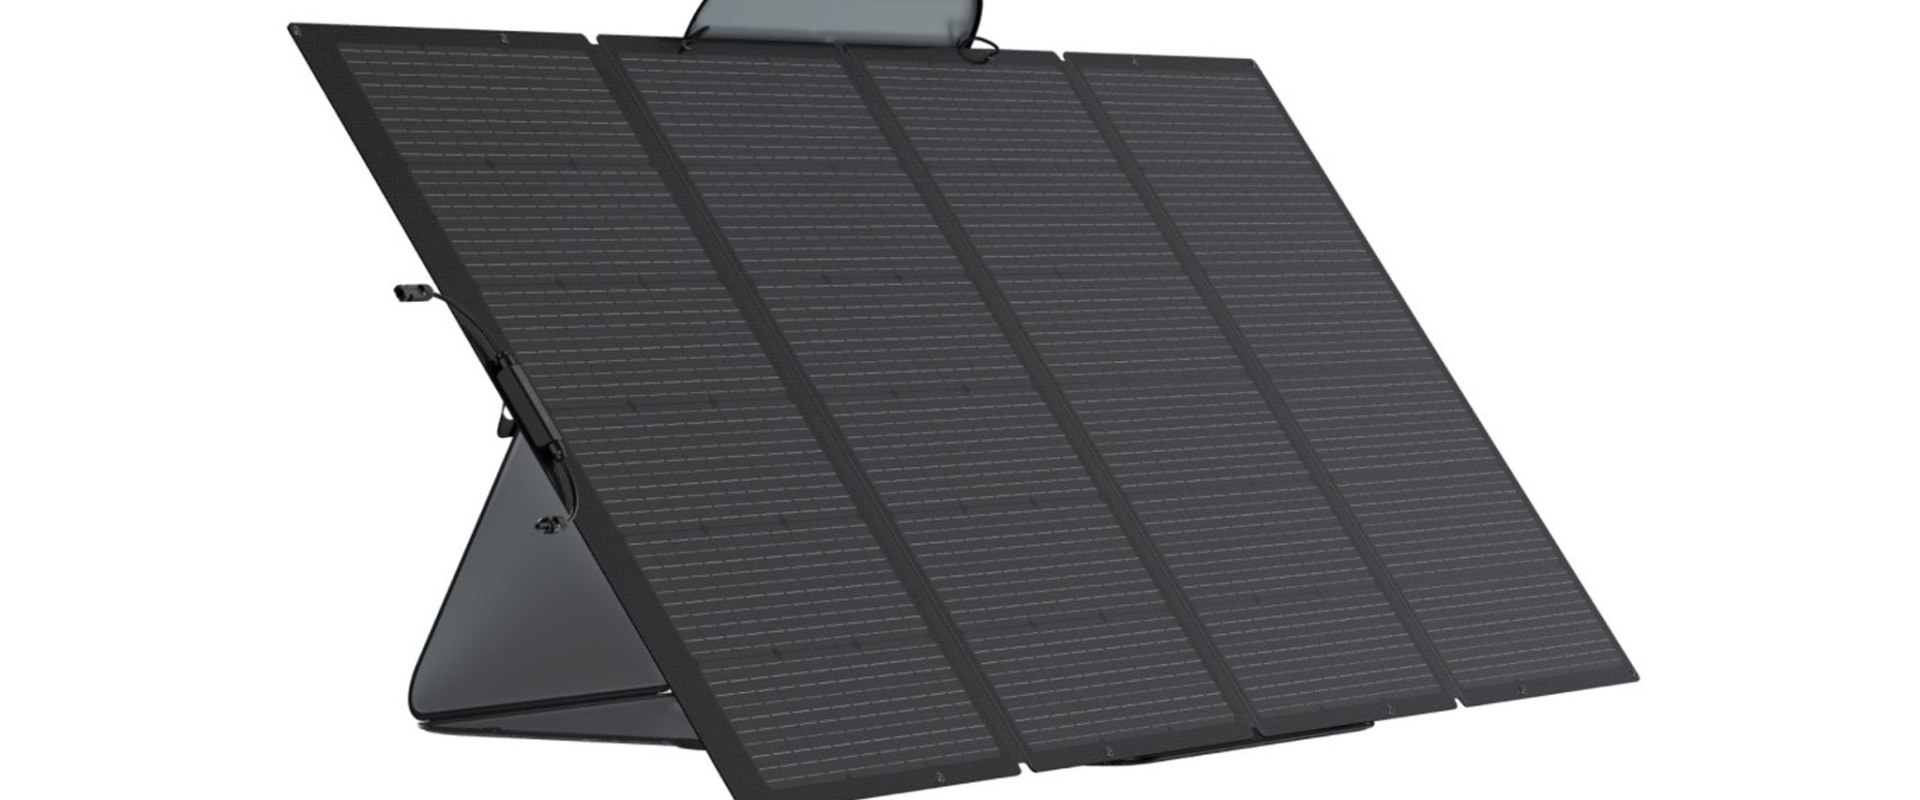 Best Solar Charger Reviews: A Comprehensive Overview